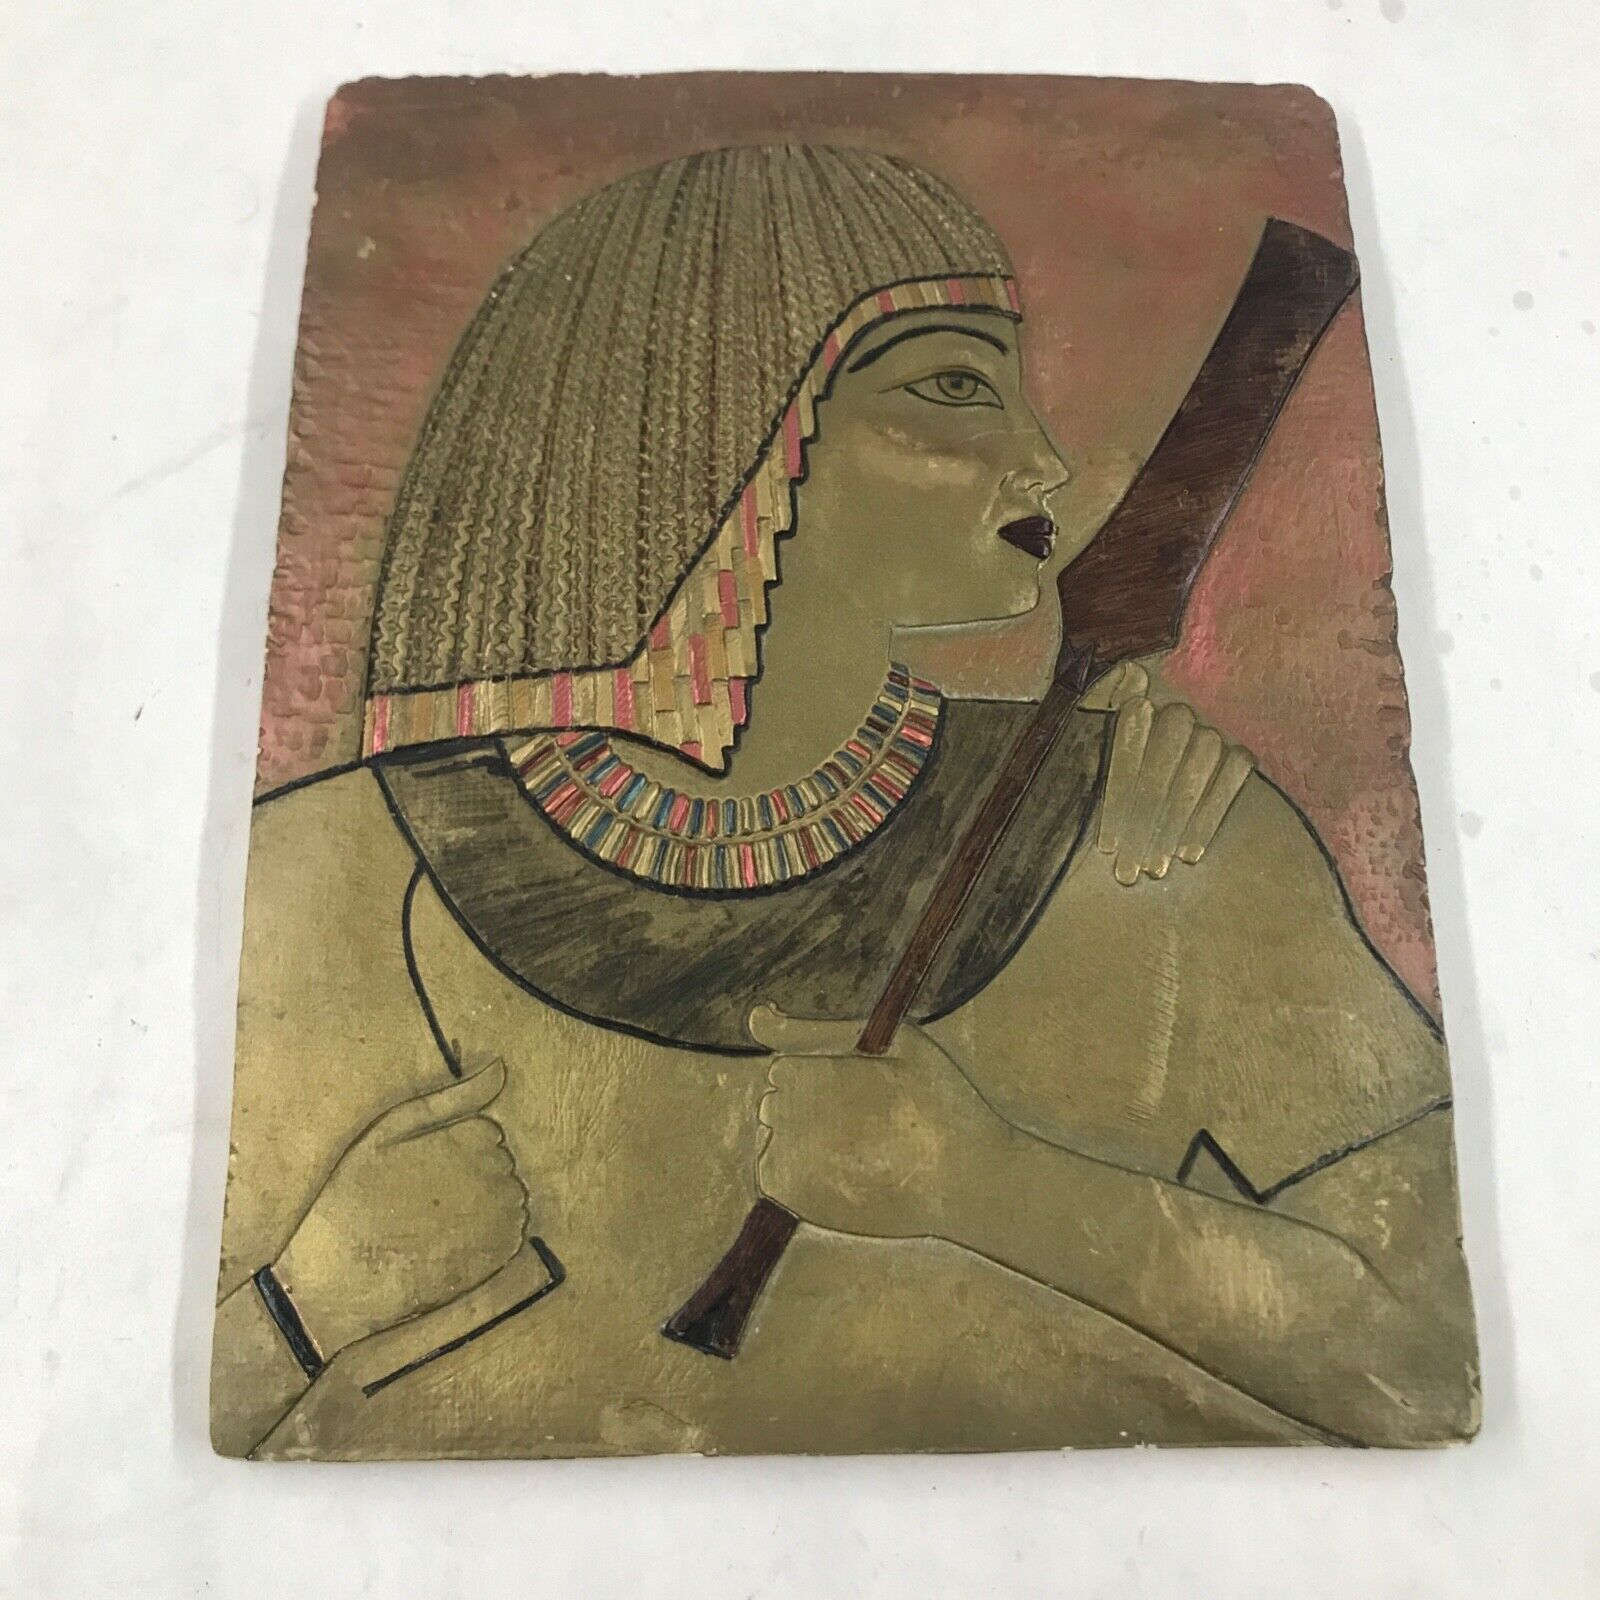 Egyptian Pharaoh Relief Wall Plaque From The Metropolitan Museum of Art